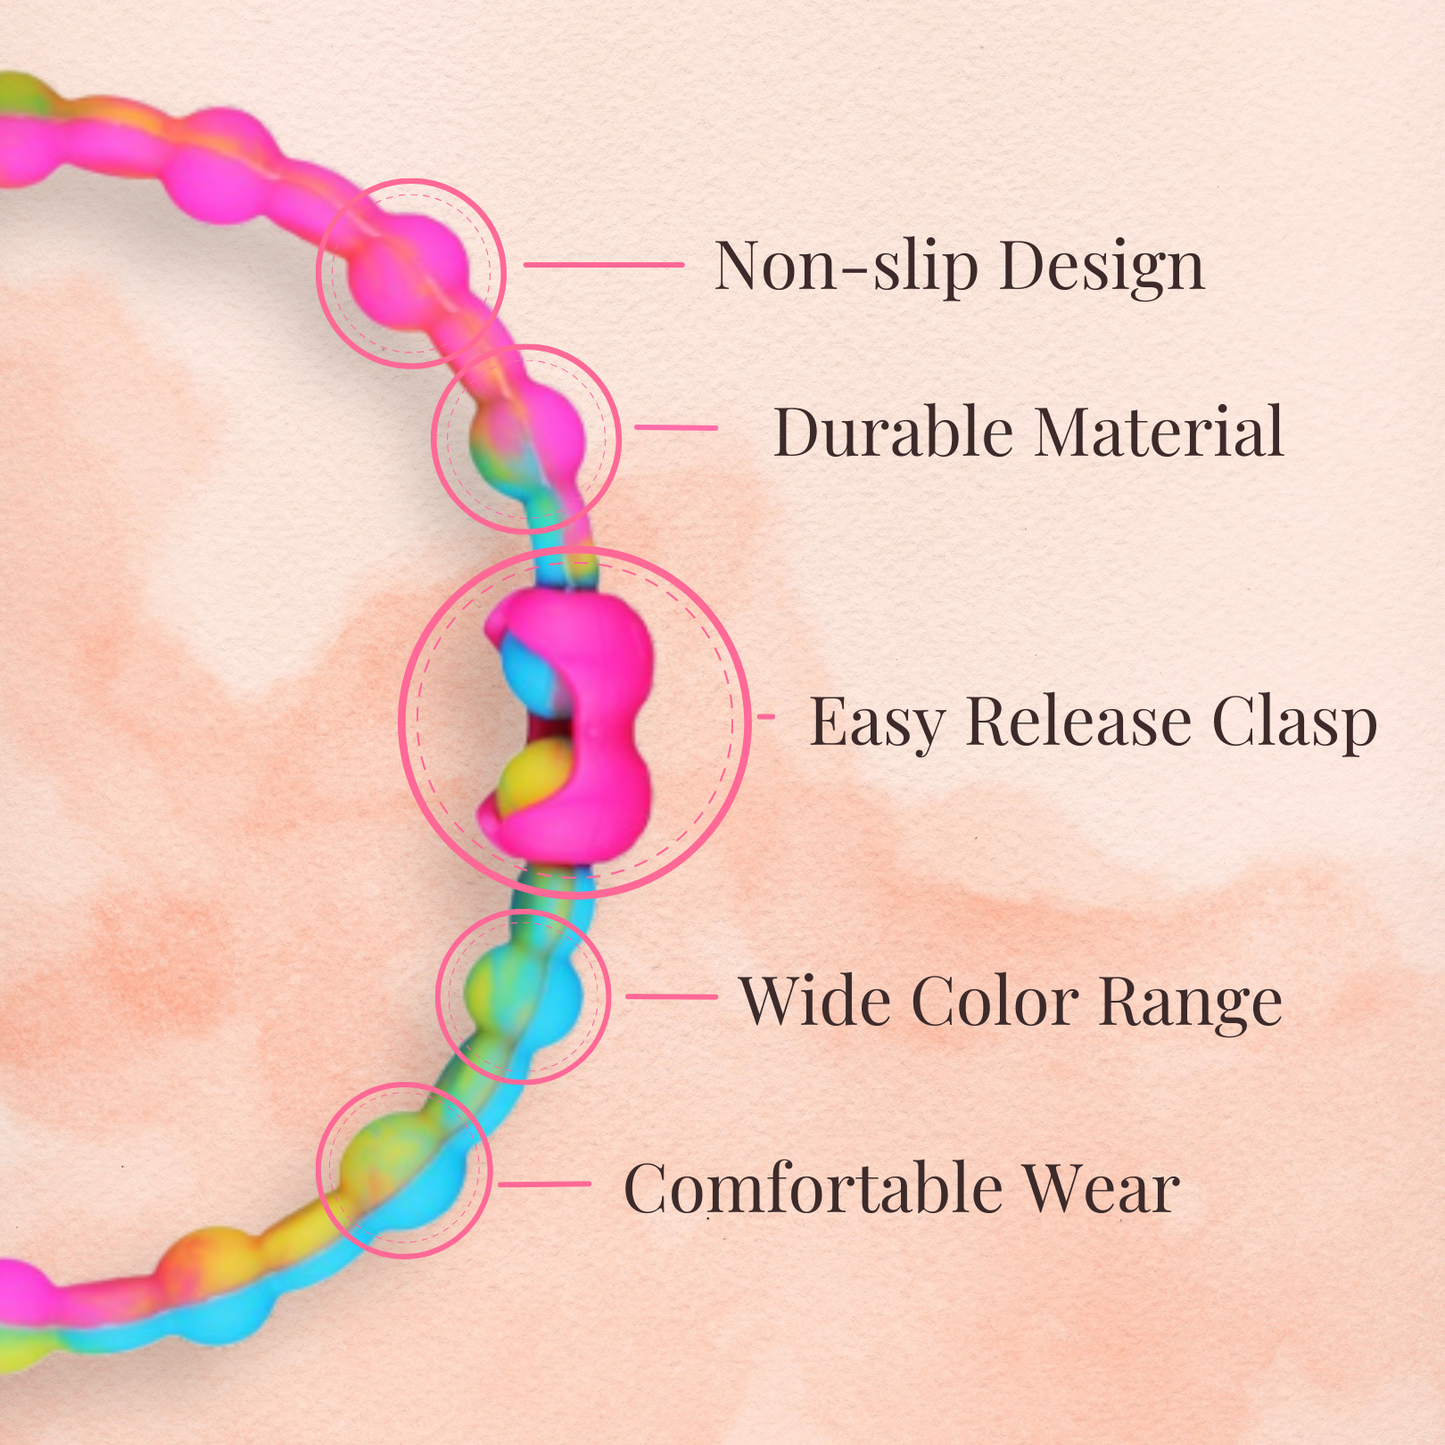 Cloudy Clear Hair Ties (6-Pack): Soft, Whimsical Style for Your Hair